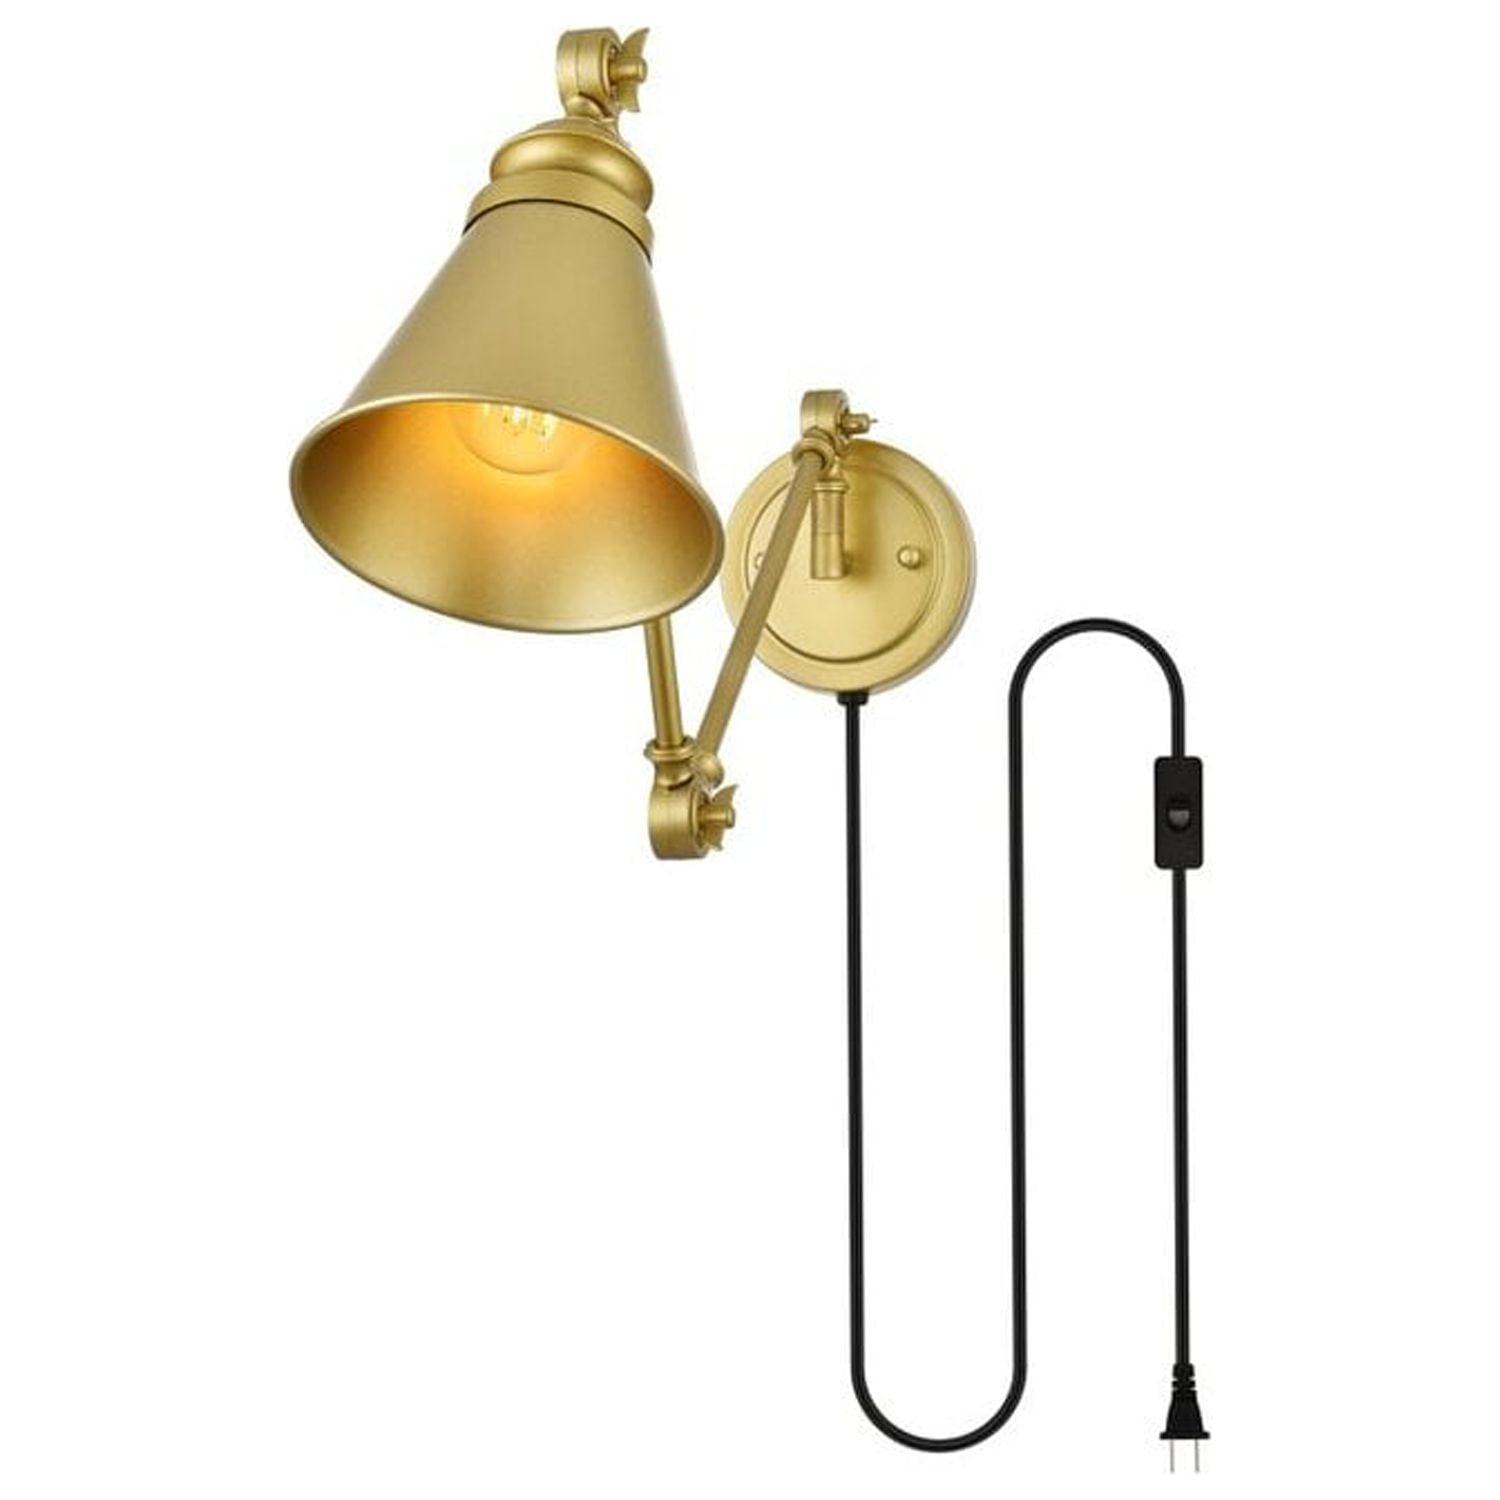 Adjustable Brass Swing Arm Wall Sconce with Dimmable Downlight